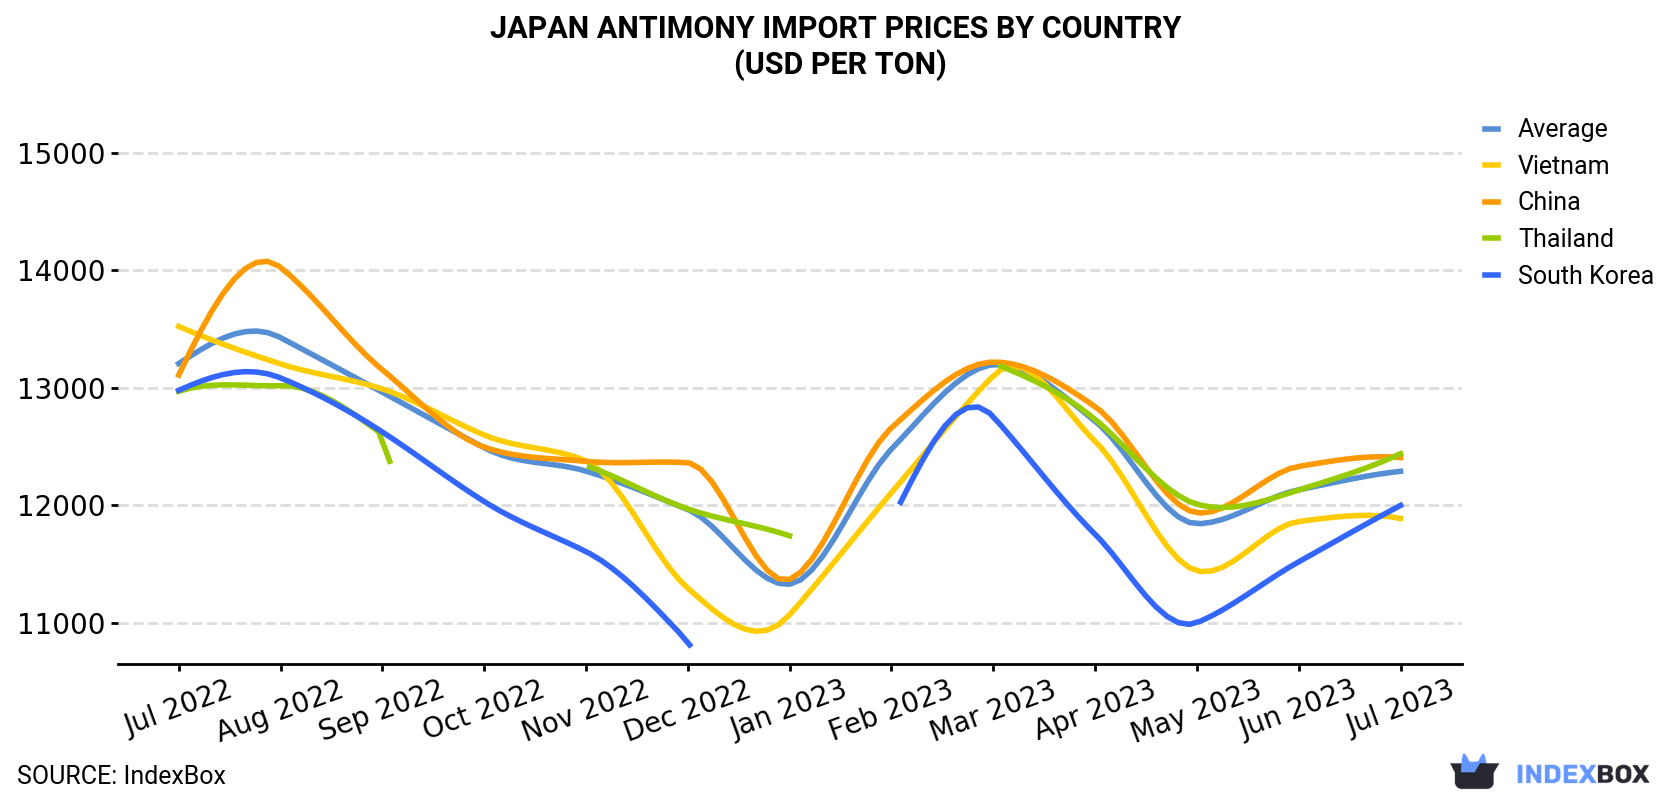 Japan Antimony Import Prices By Country (USD Per Ton)